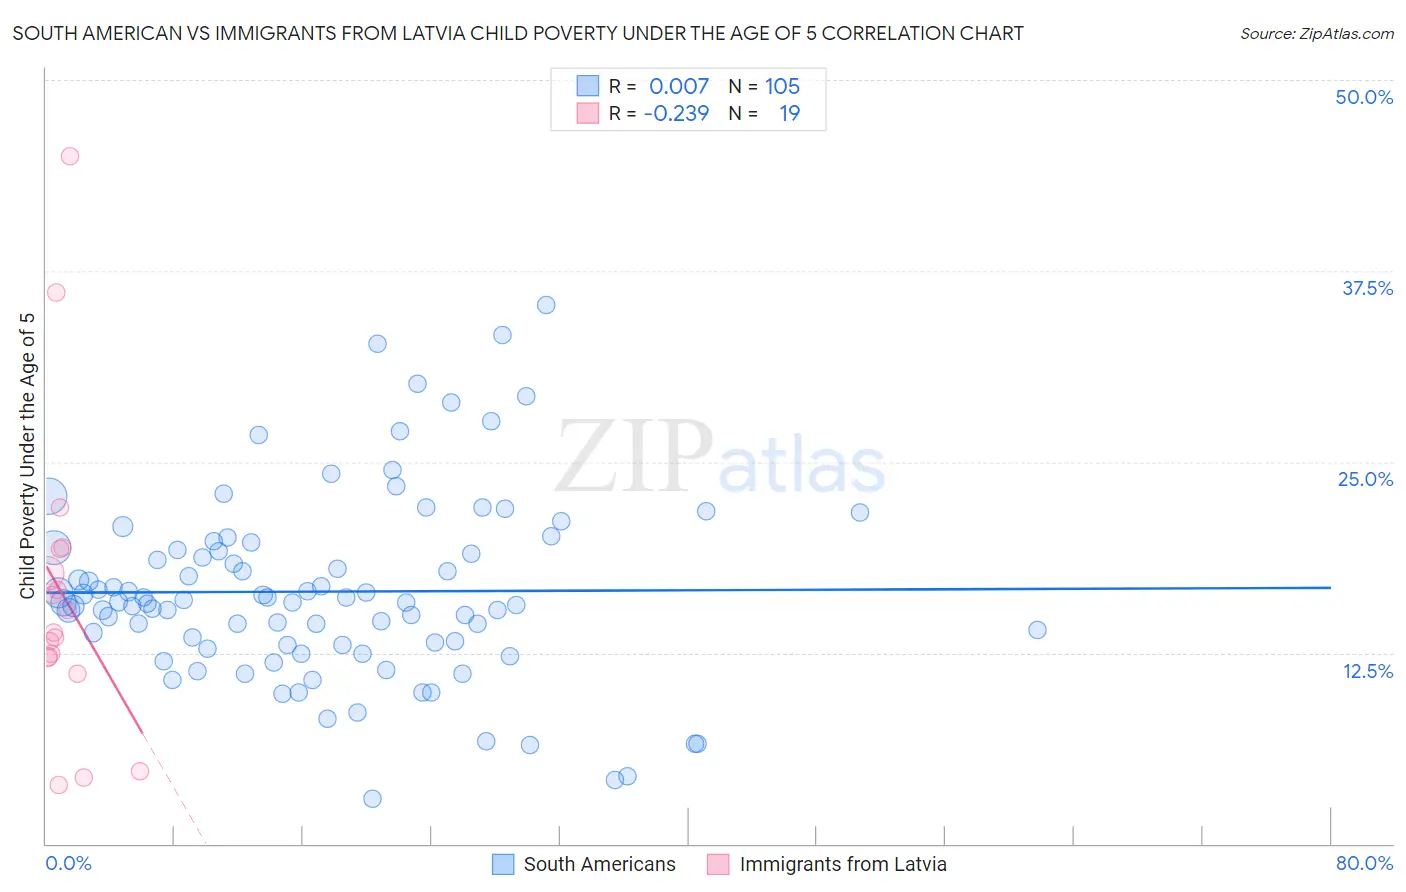 South American vs Immigrants from Latvia Child Poverty Under the Age of 5